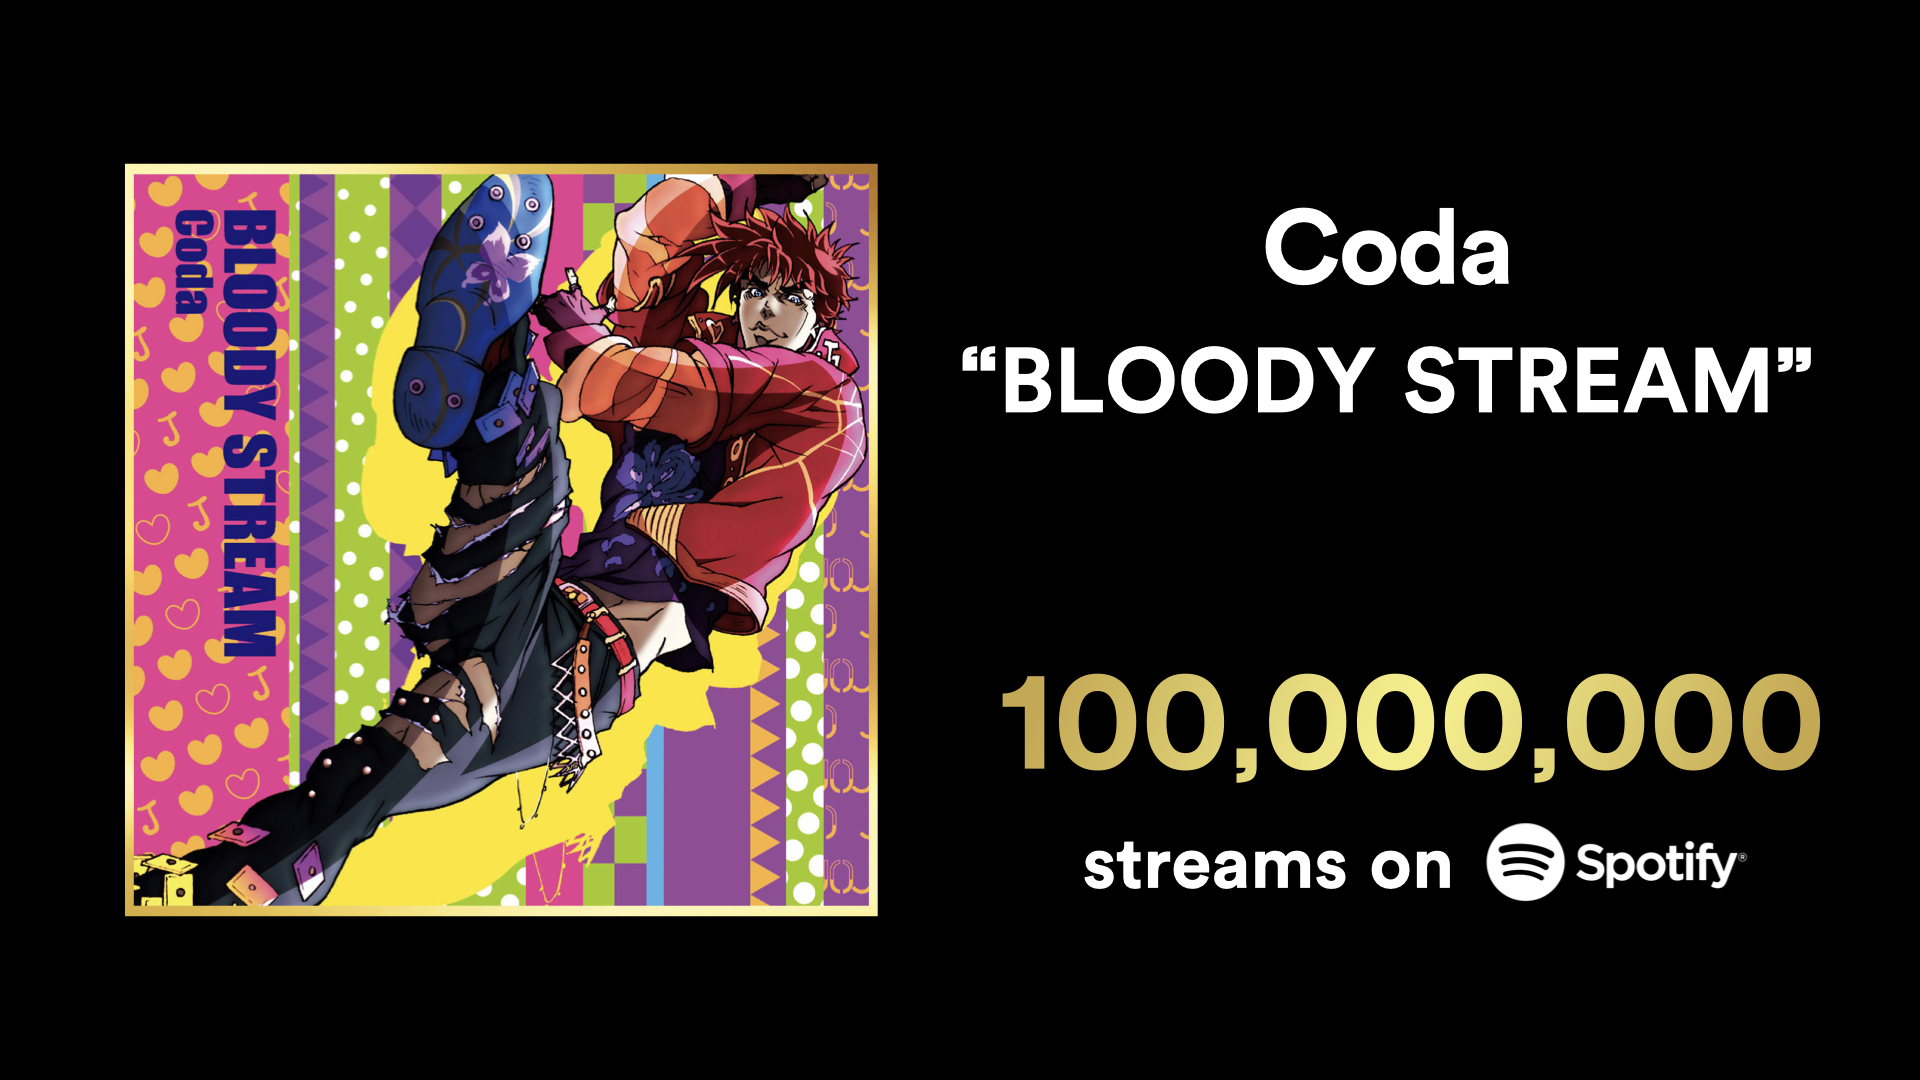 “BLOODY STREAM” Opening Exceeds 100 Million Streams on Spotify